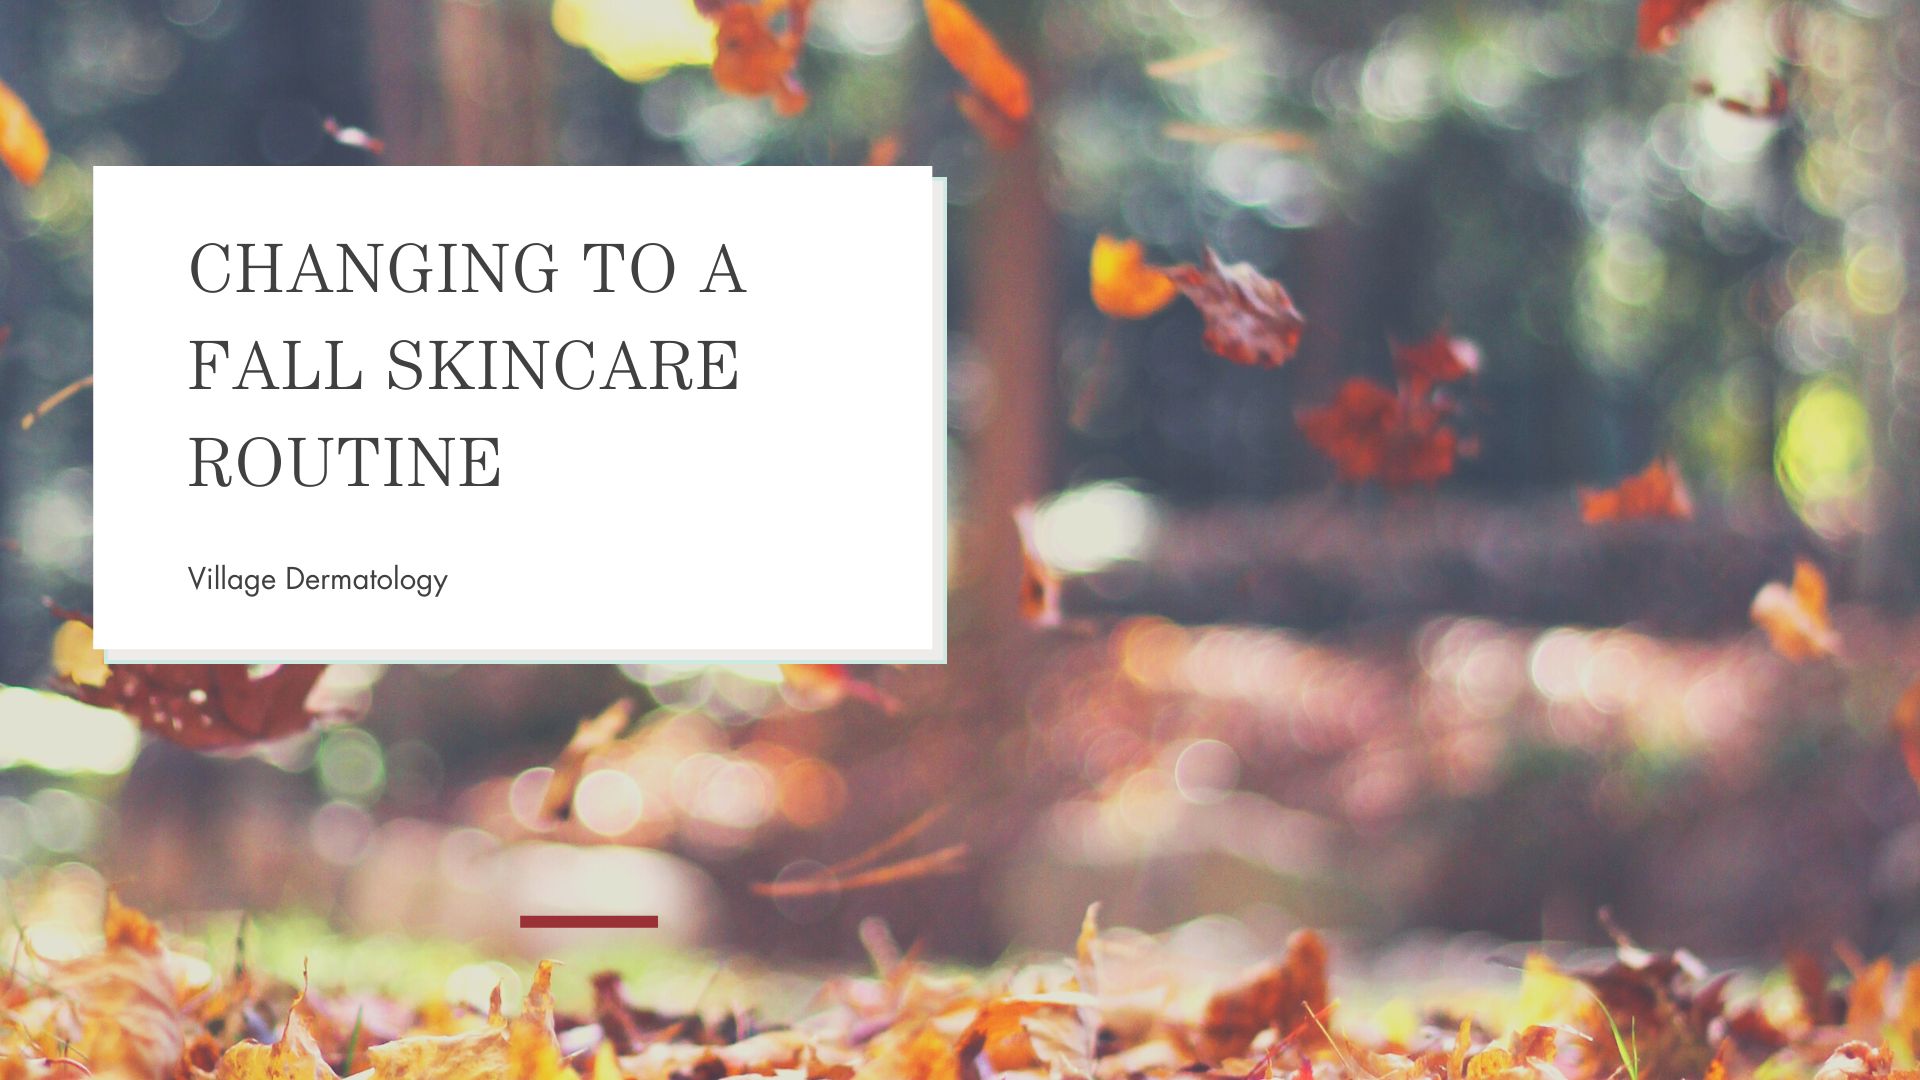 Changing to a fall skincare routine